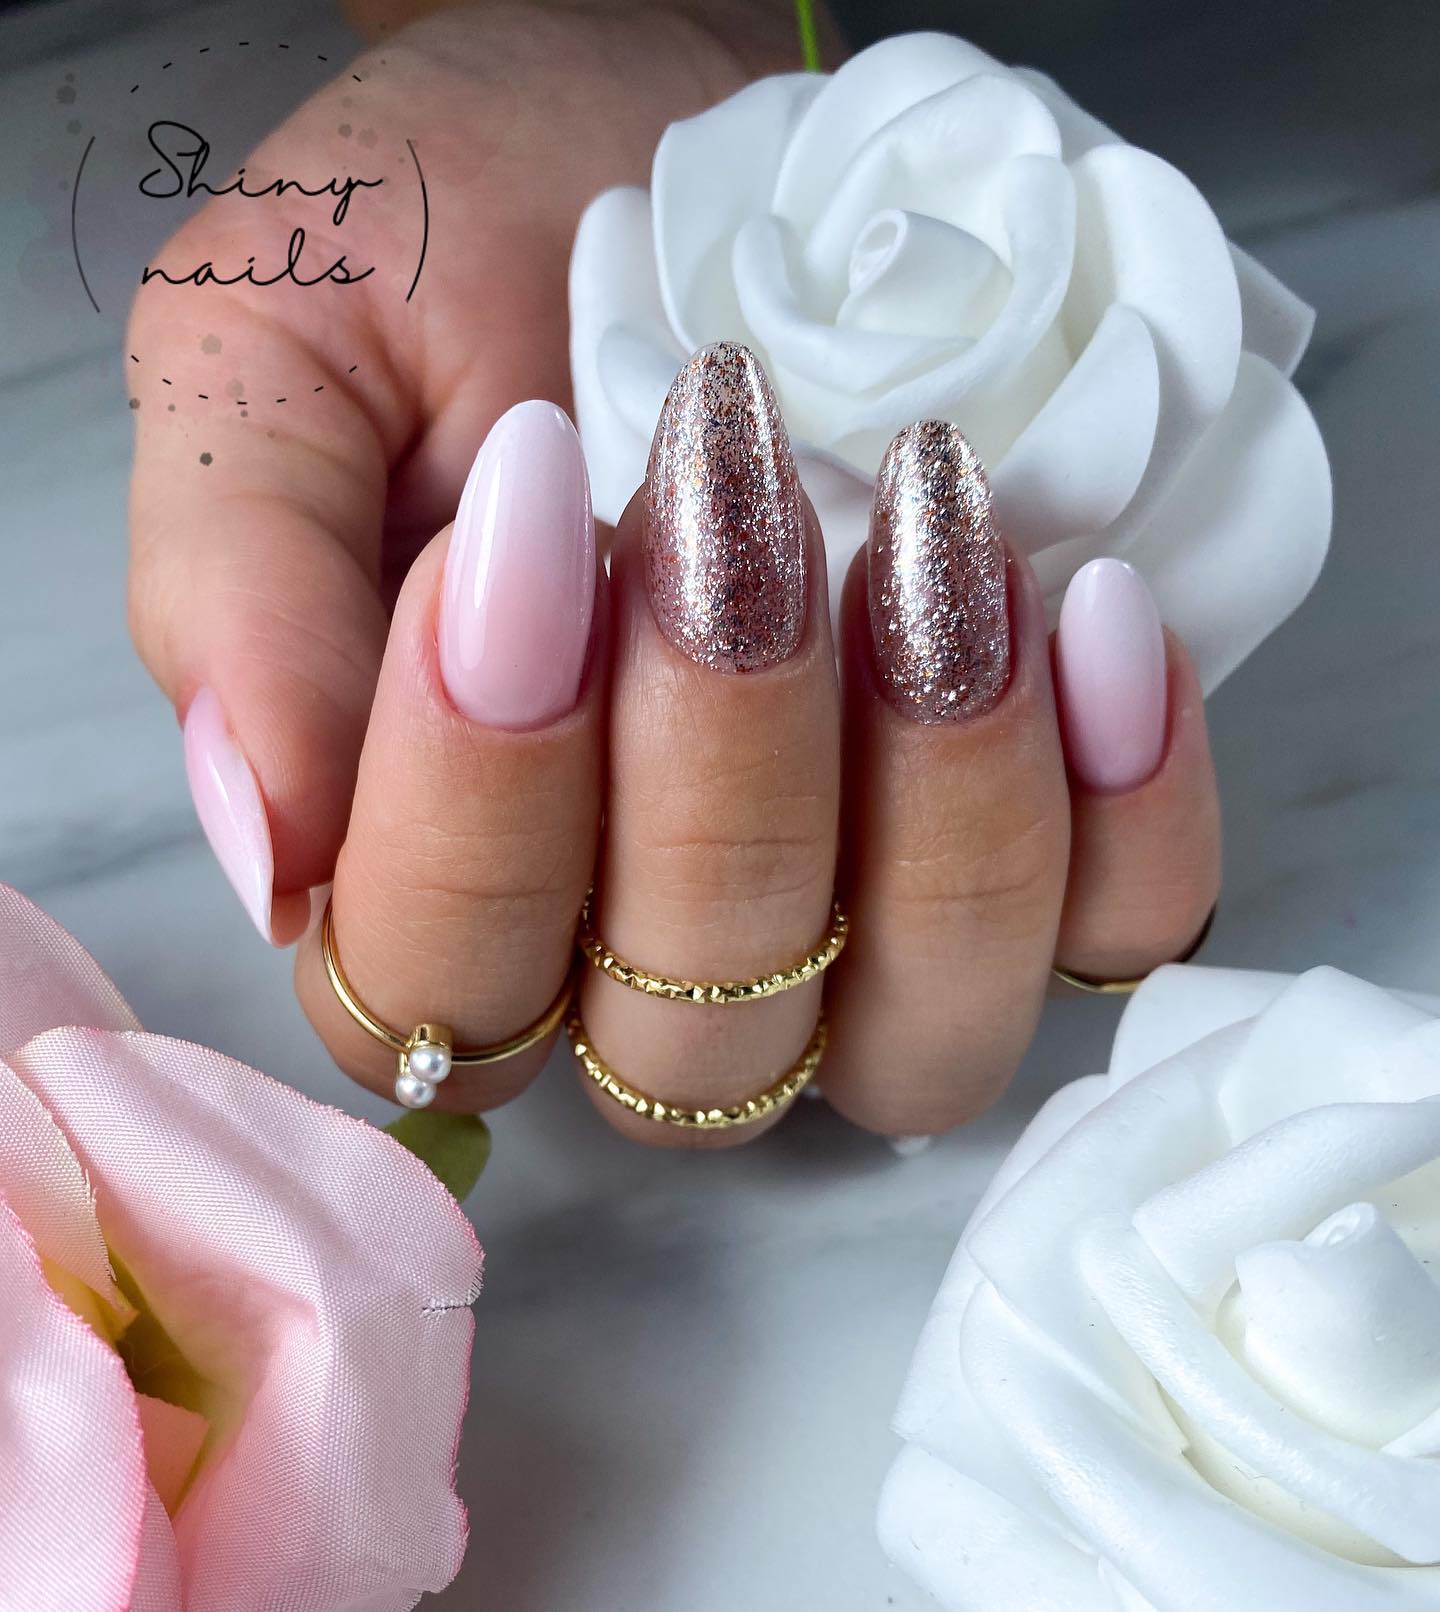 Shimmery and feminine, this cool manicure will look adorable for your formal events and parties where you wish to fully shine!